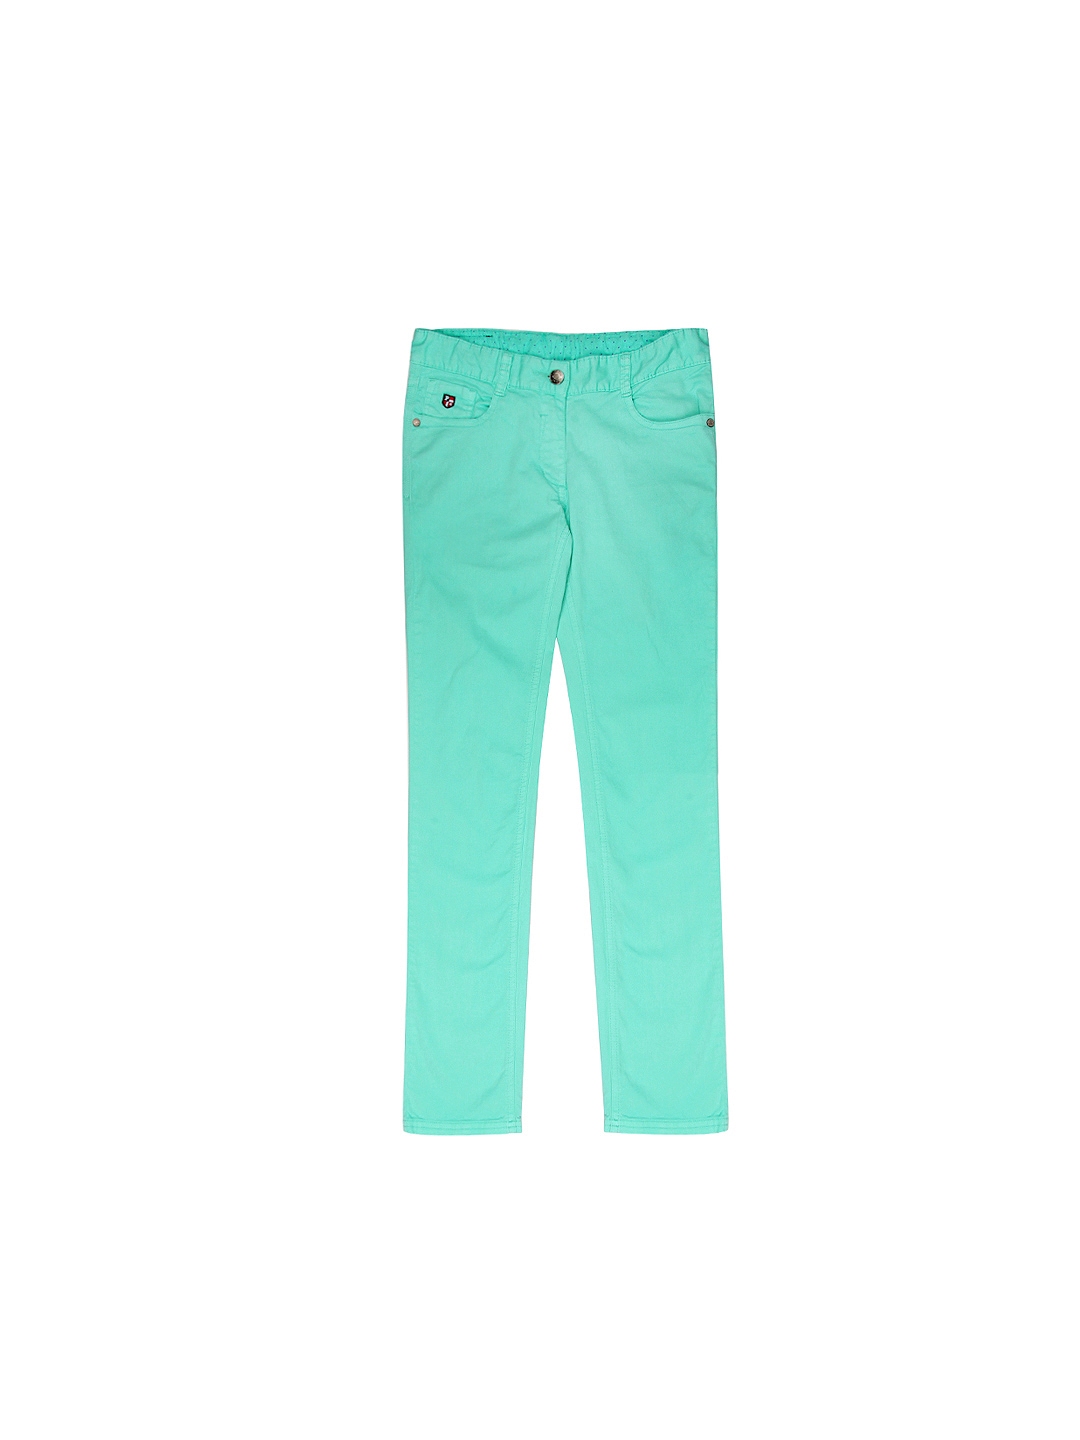 Buy U.S. Polo Assn. Kids Girls Blue Stretchable Jeans - Jeans for Girls ...